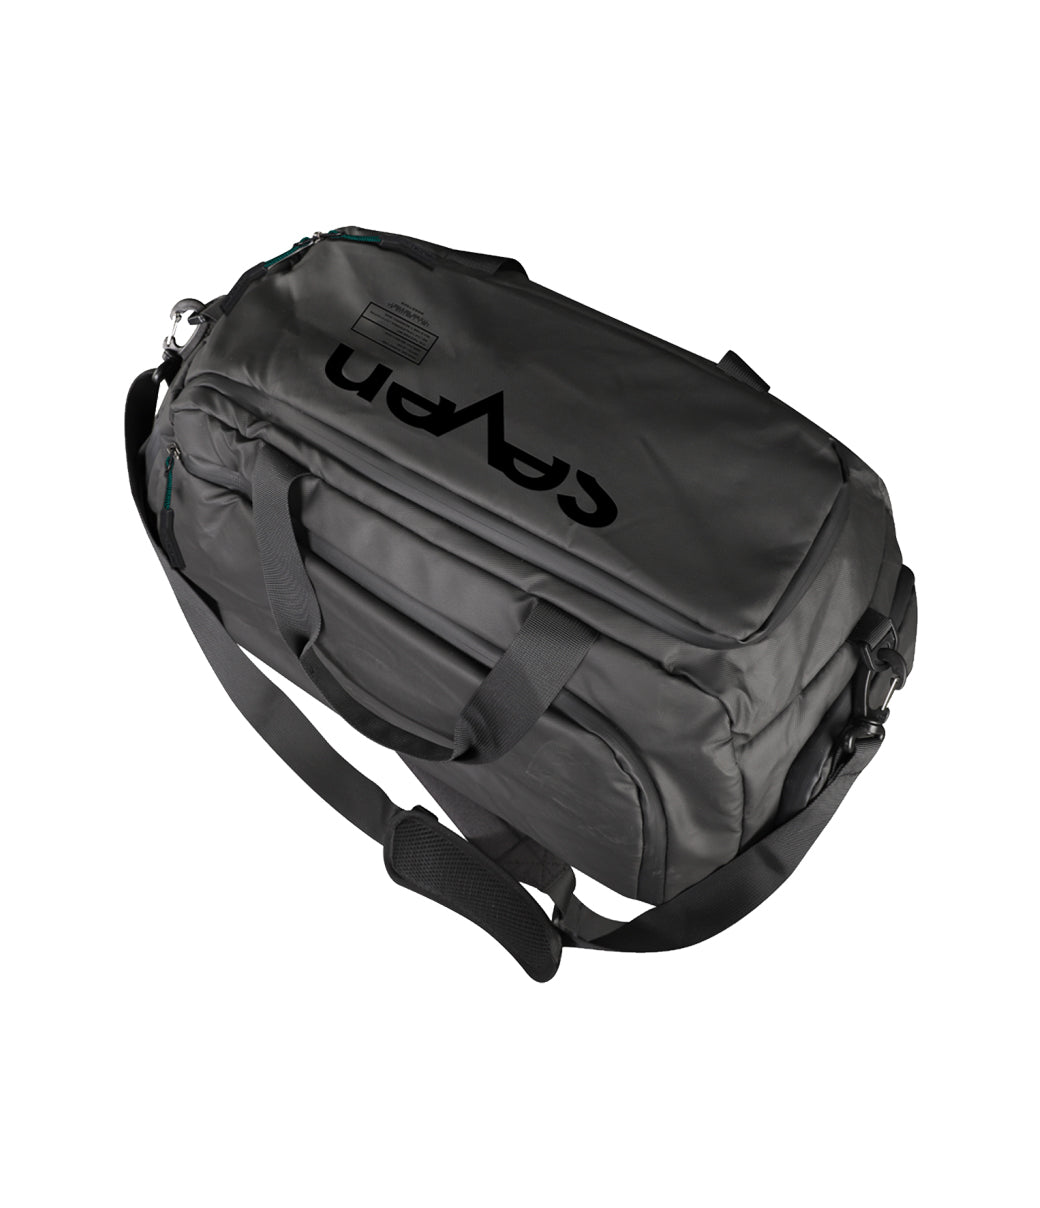  Roamlite Extra Large 29 XXL Duffel Holdall - X-L Size Very  Big Travel Bags - Huge Duffle for Storage, Travelling, Sports Kit or  Laundry - 29 inch x15x15 120 Litre, Black RL04K